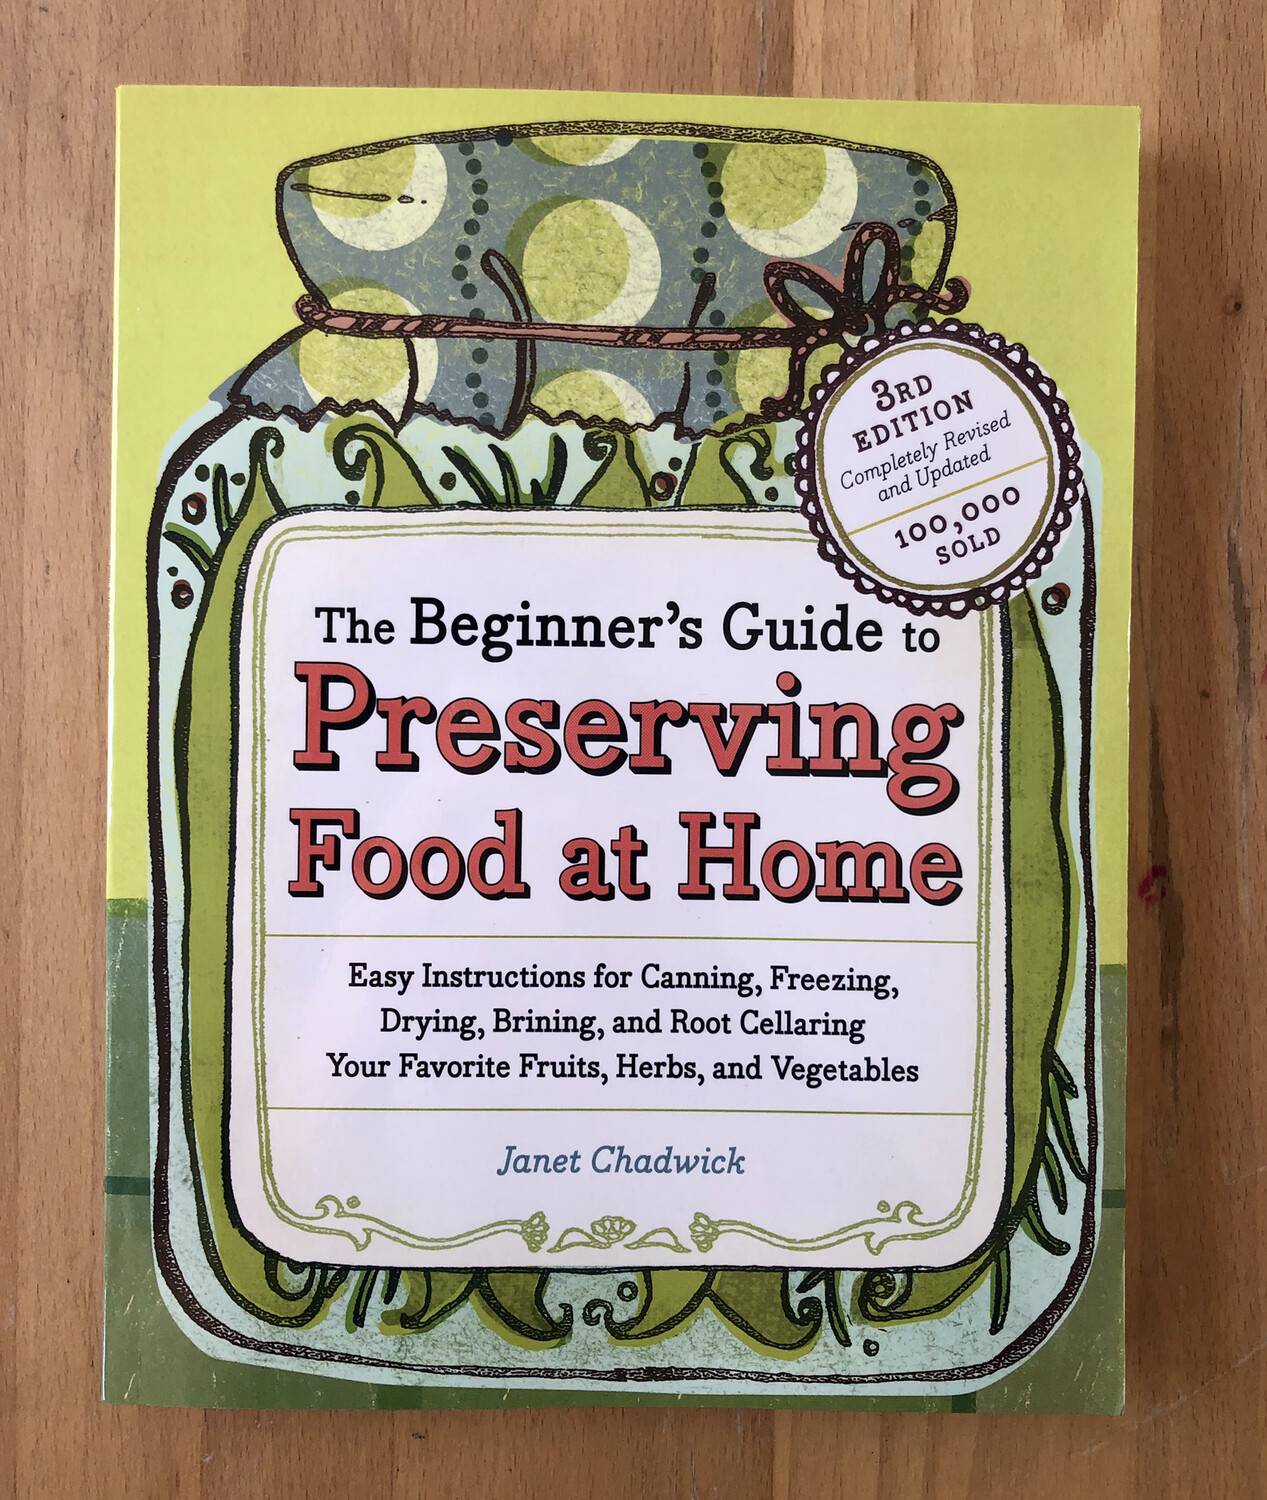 The Beginner's Guide to Preserving Food at Home